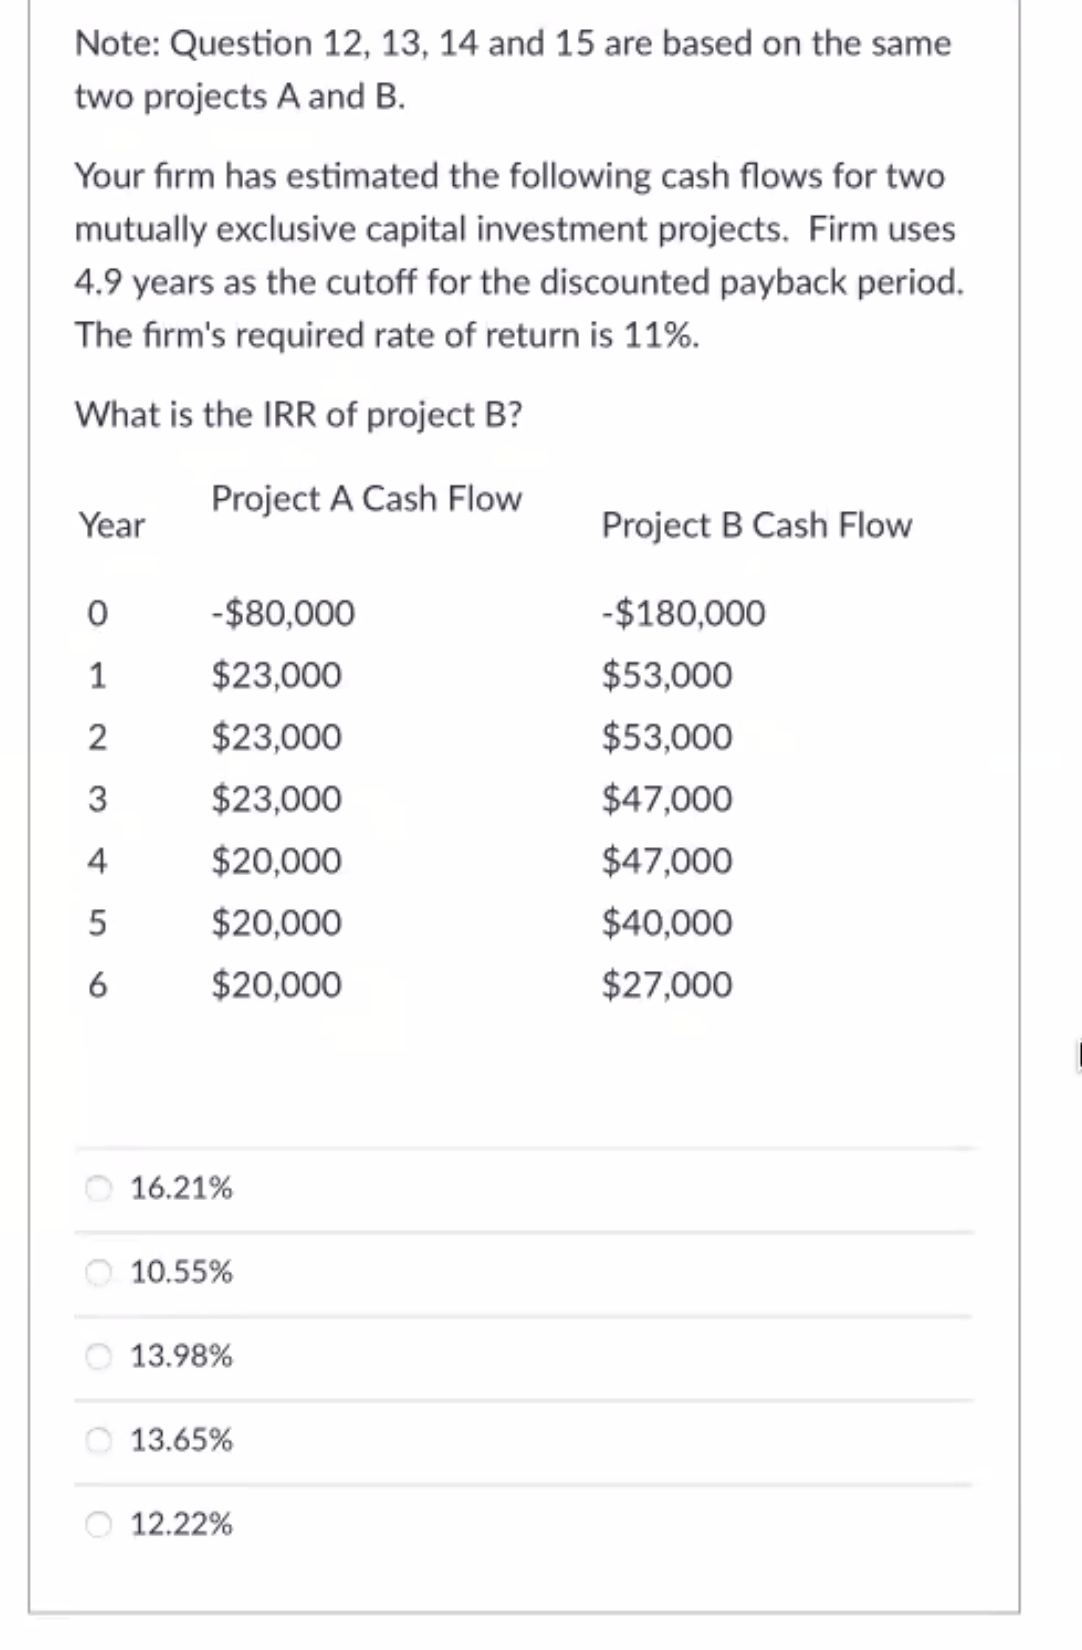 Note: Question 12, 13, 14 and 15 are based on the same
two projects A and B.
Your firm has estimated the following cash flows for two
mutually exclusive capital investment projects. Firm uses
4.9 years as the cutoff for the discounted payback period.
The firm's required rate of return is 11%.
What is the IRR of project B?
Project A Cash Flow
Year
Project B Cash Flow
-$80,000
-$180,000
1
$23,000
$53,000
2
$23,000
$53,000
3
$23,000
$47,000
4
$20,000
$47,000
$20,000
$40,000
6
$20,000
$27,000
O 16.21%
10.55%
13.98%
O 13.65%
12.22%
